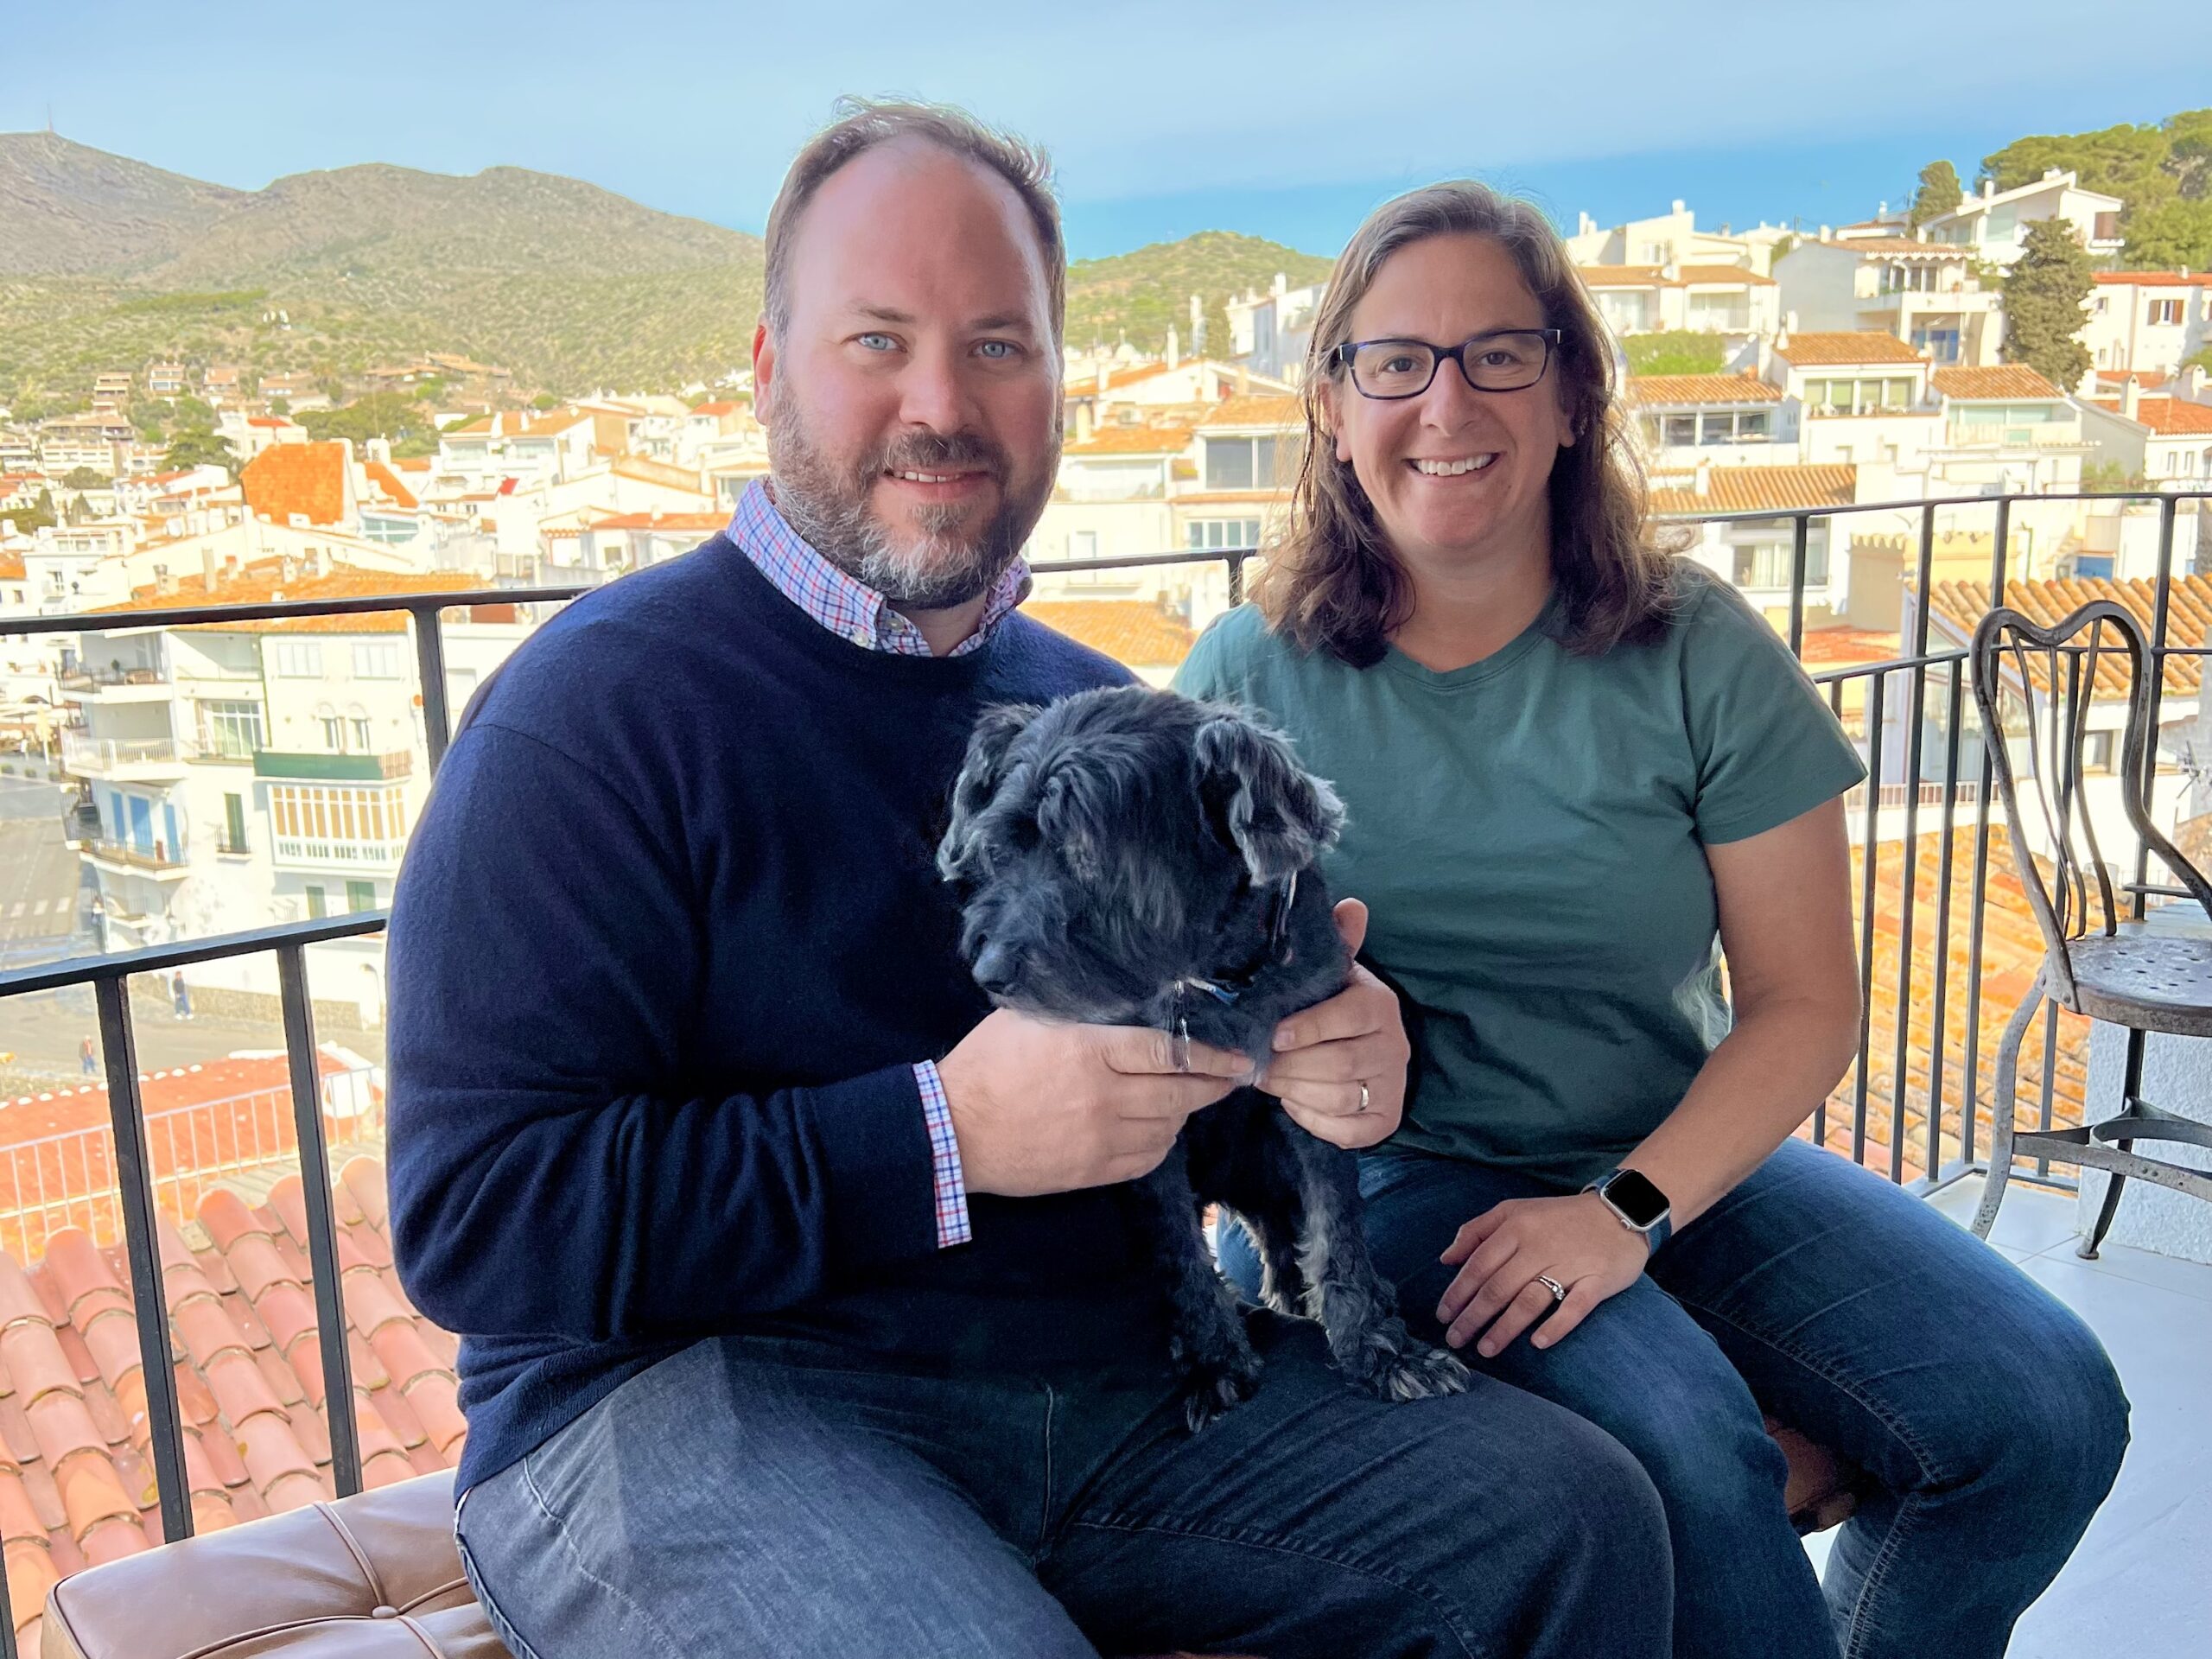 Visiting Cadaques, Spain. One day Koval will look at the camera.